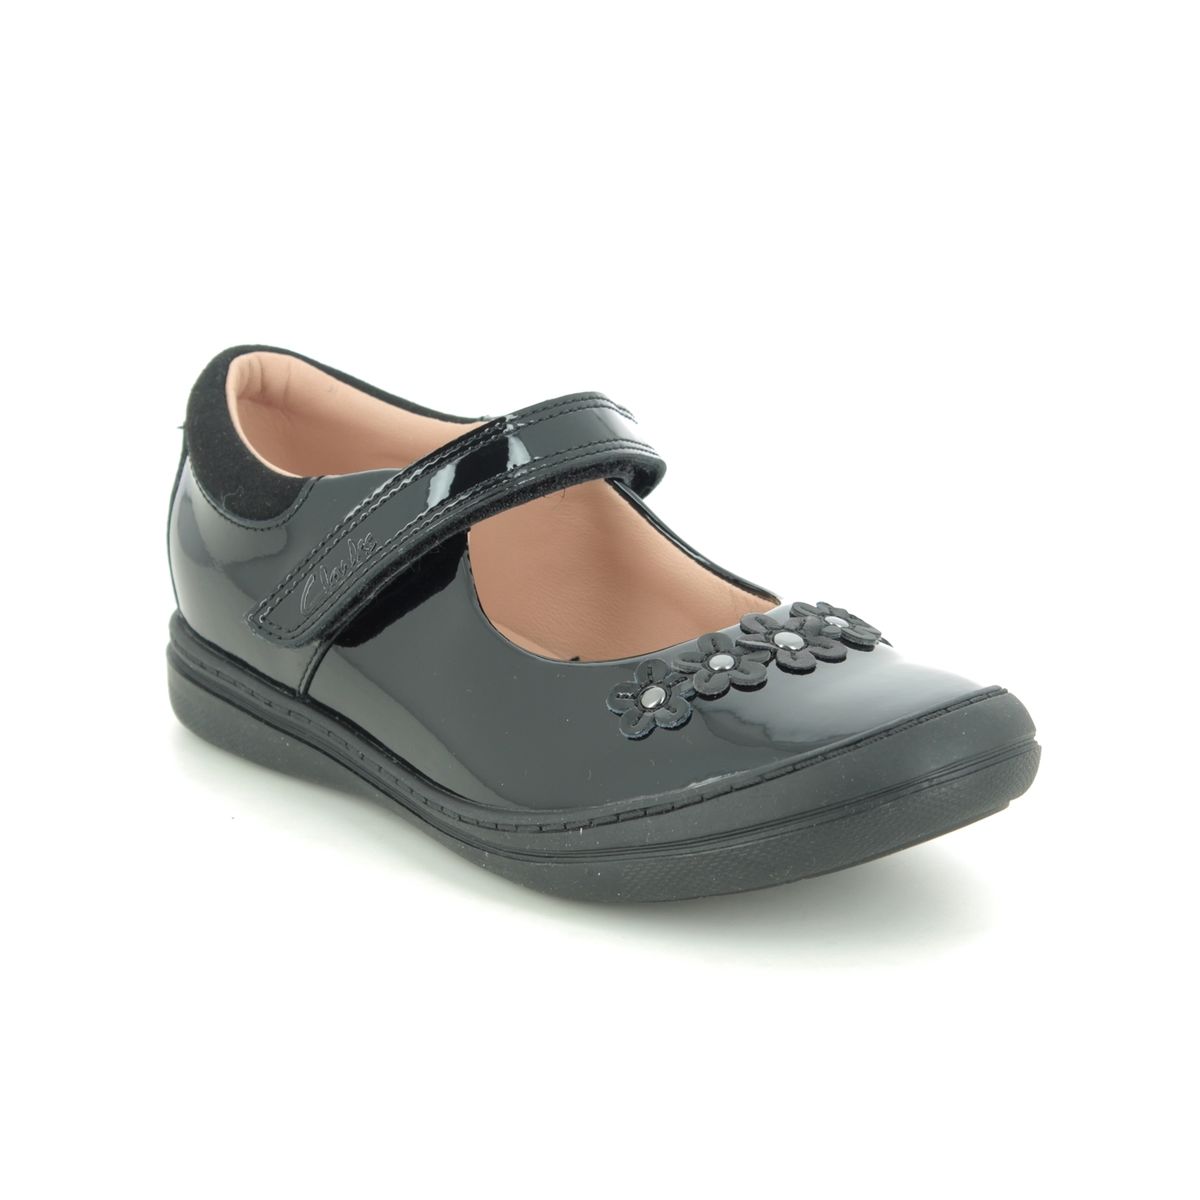 Clarks Scooter K G Fit Black patent girls school shoes